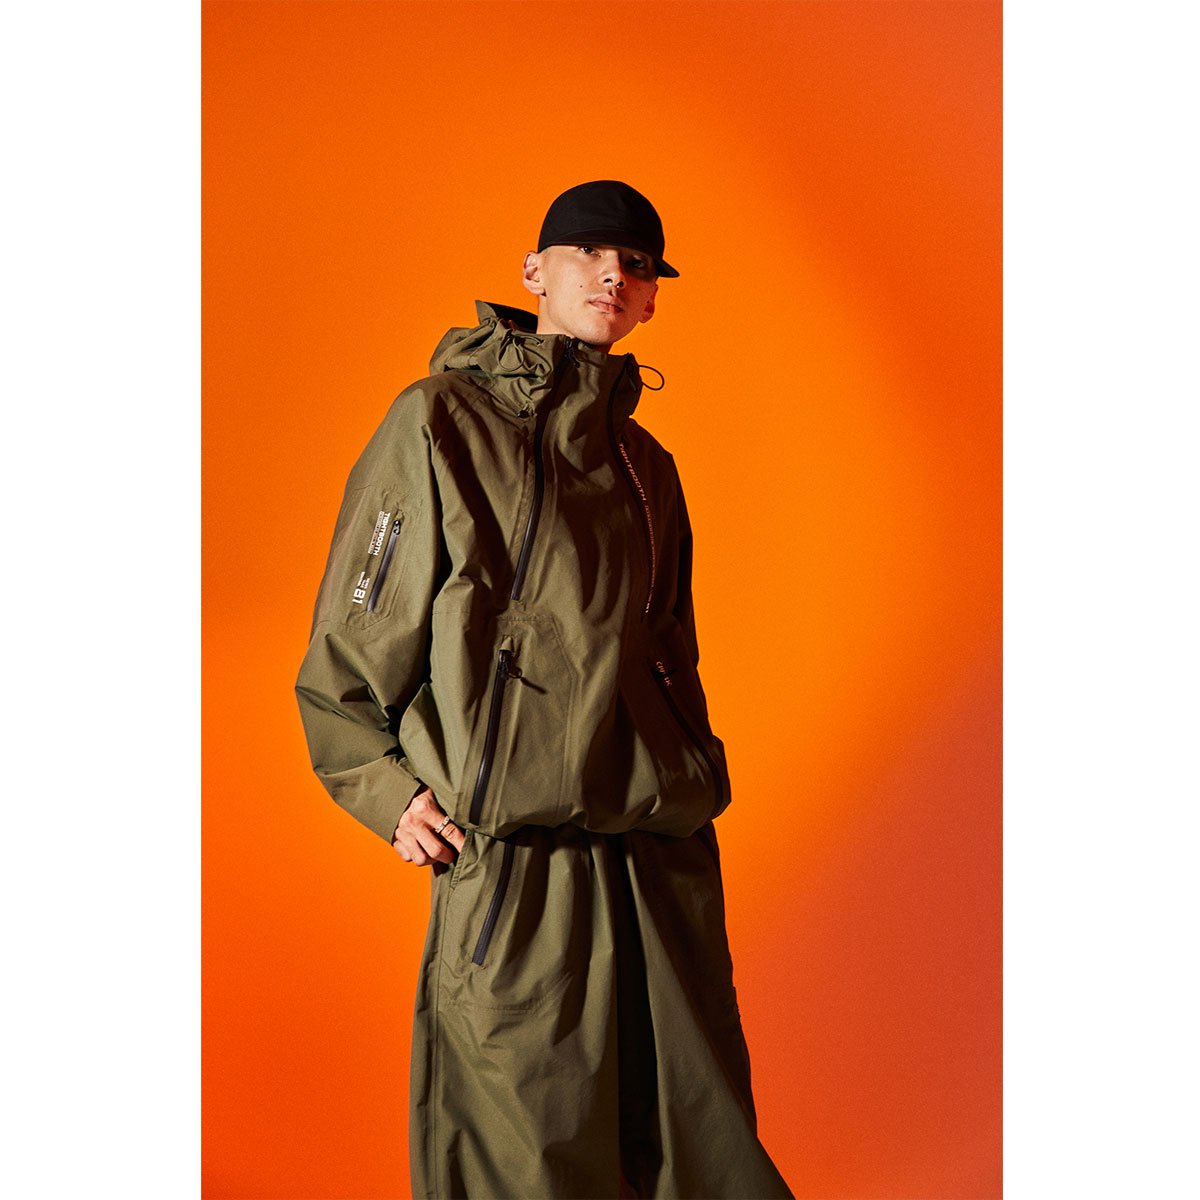 3 LAYER ANORAK - TIGHTBOOTH PRODUCTION